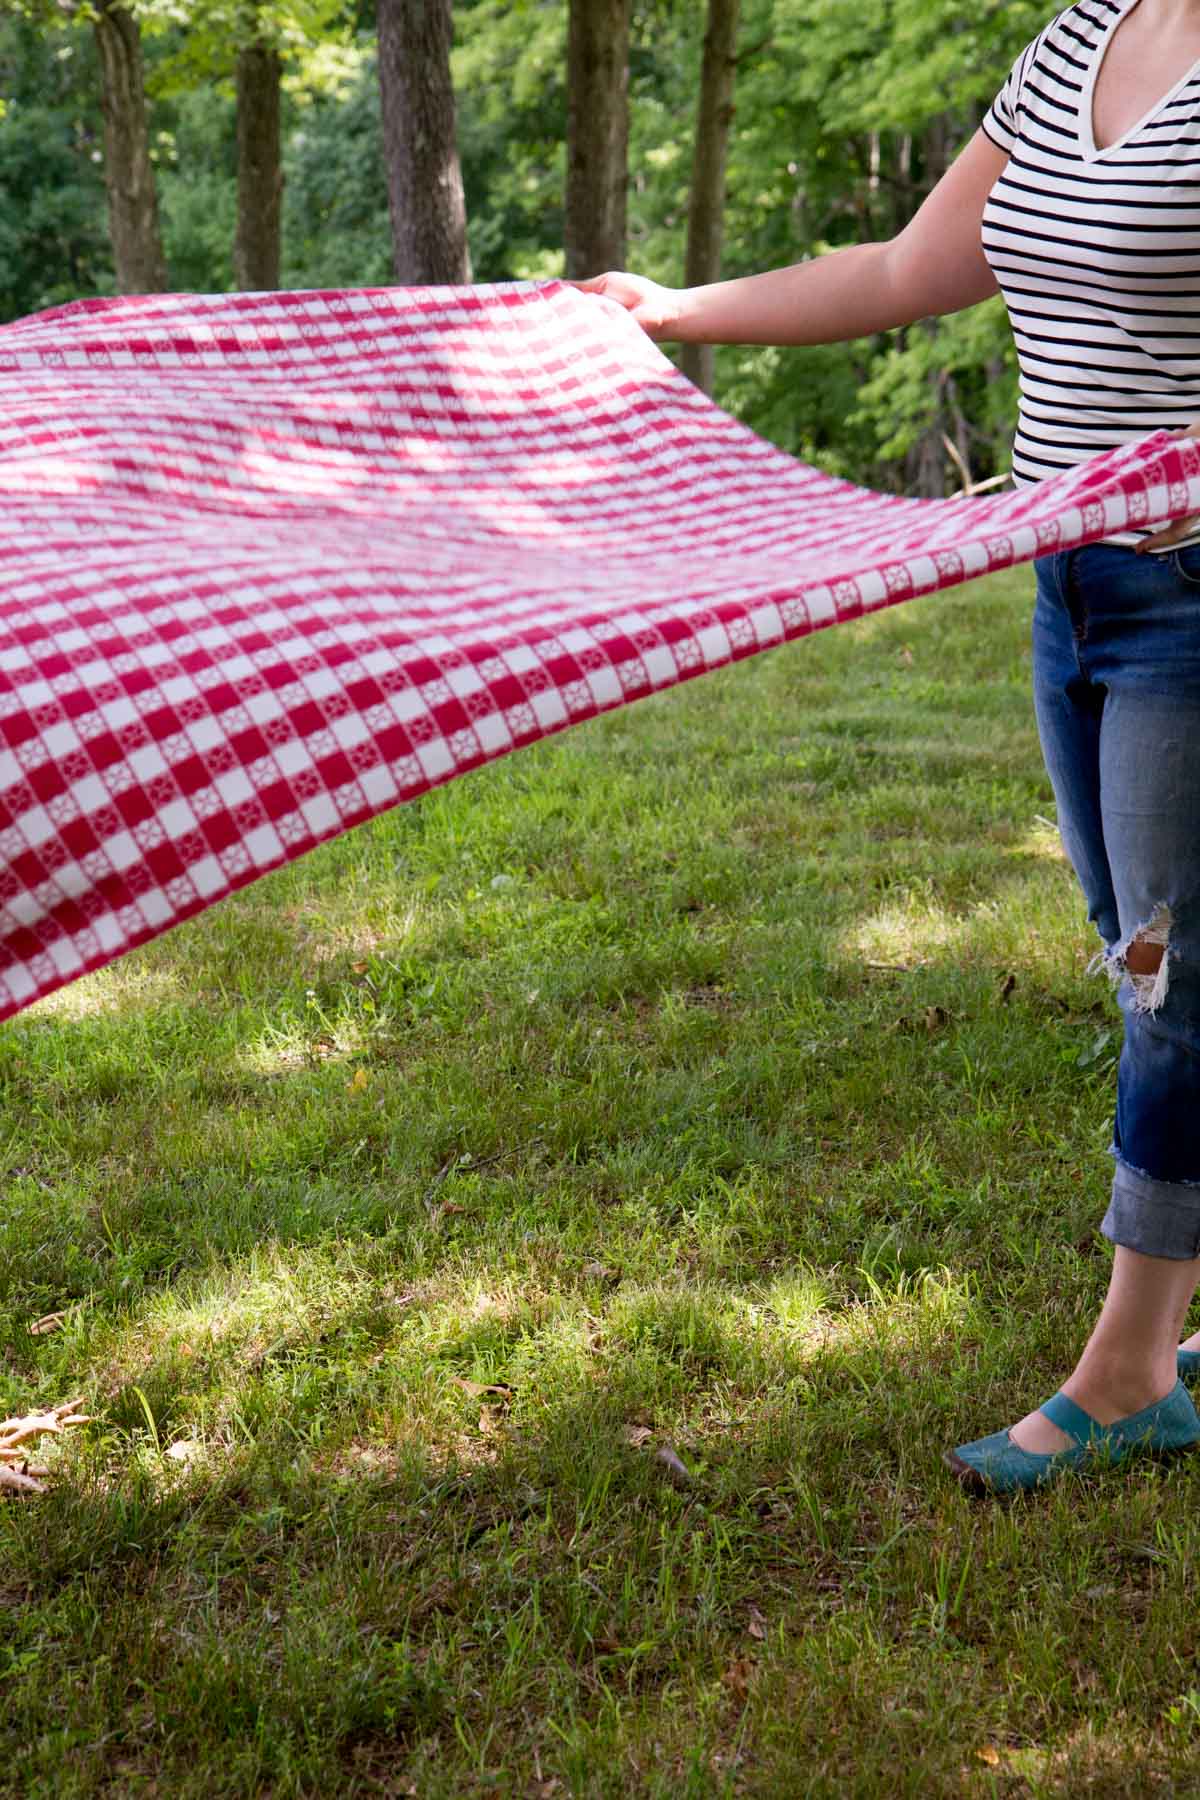 How to Pack an Awesome Picnic